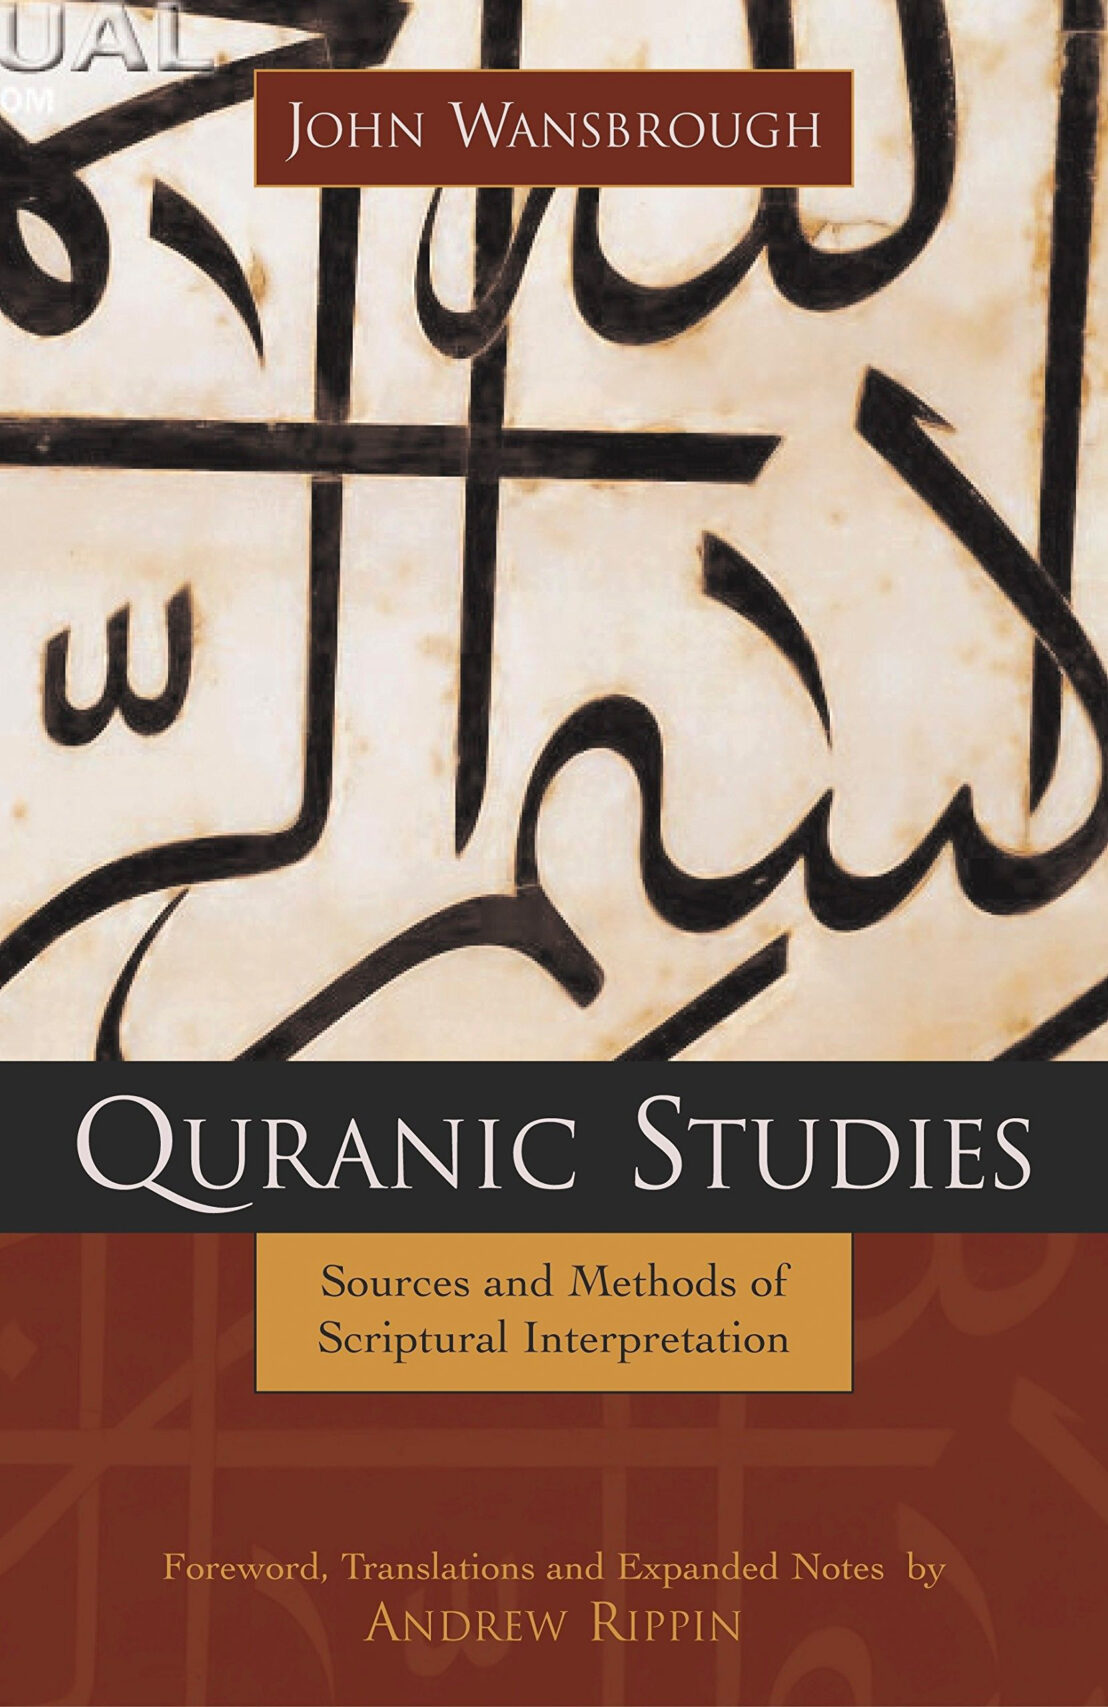 Quranic Studies: Sources and Methods of Scriptural by John Wansbrough